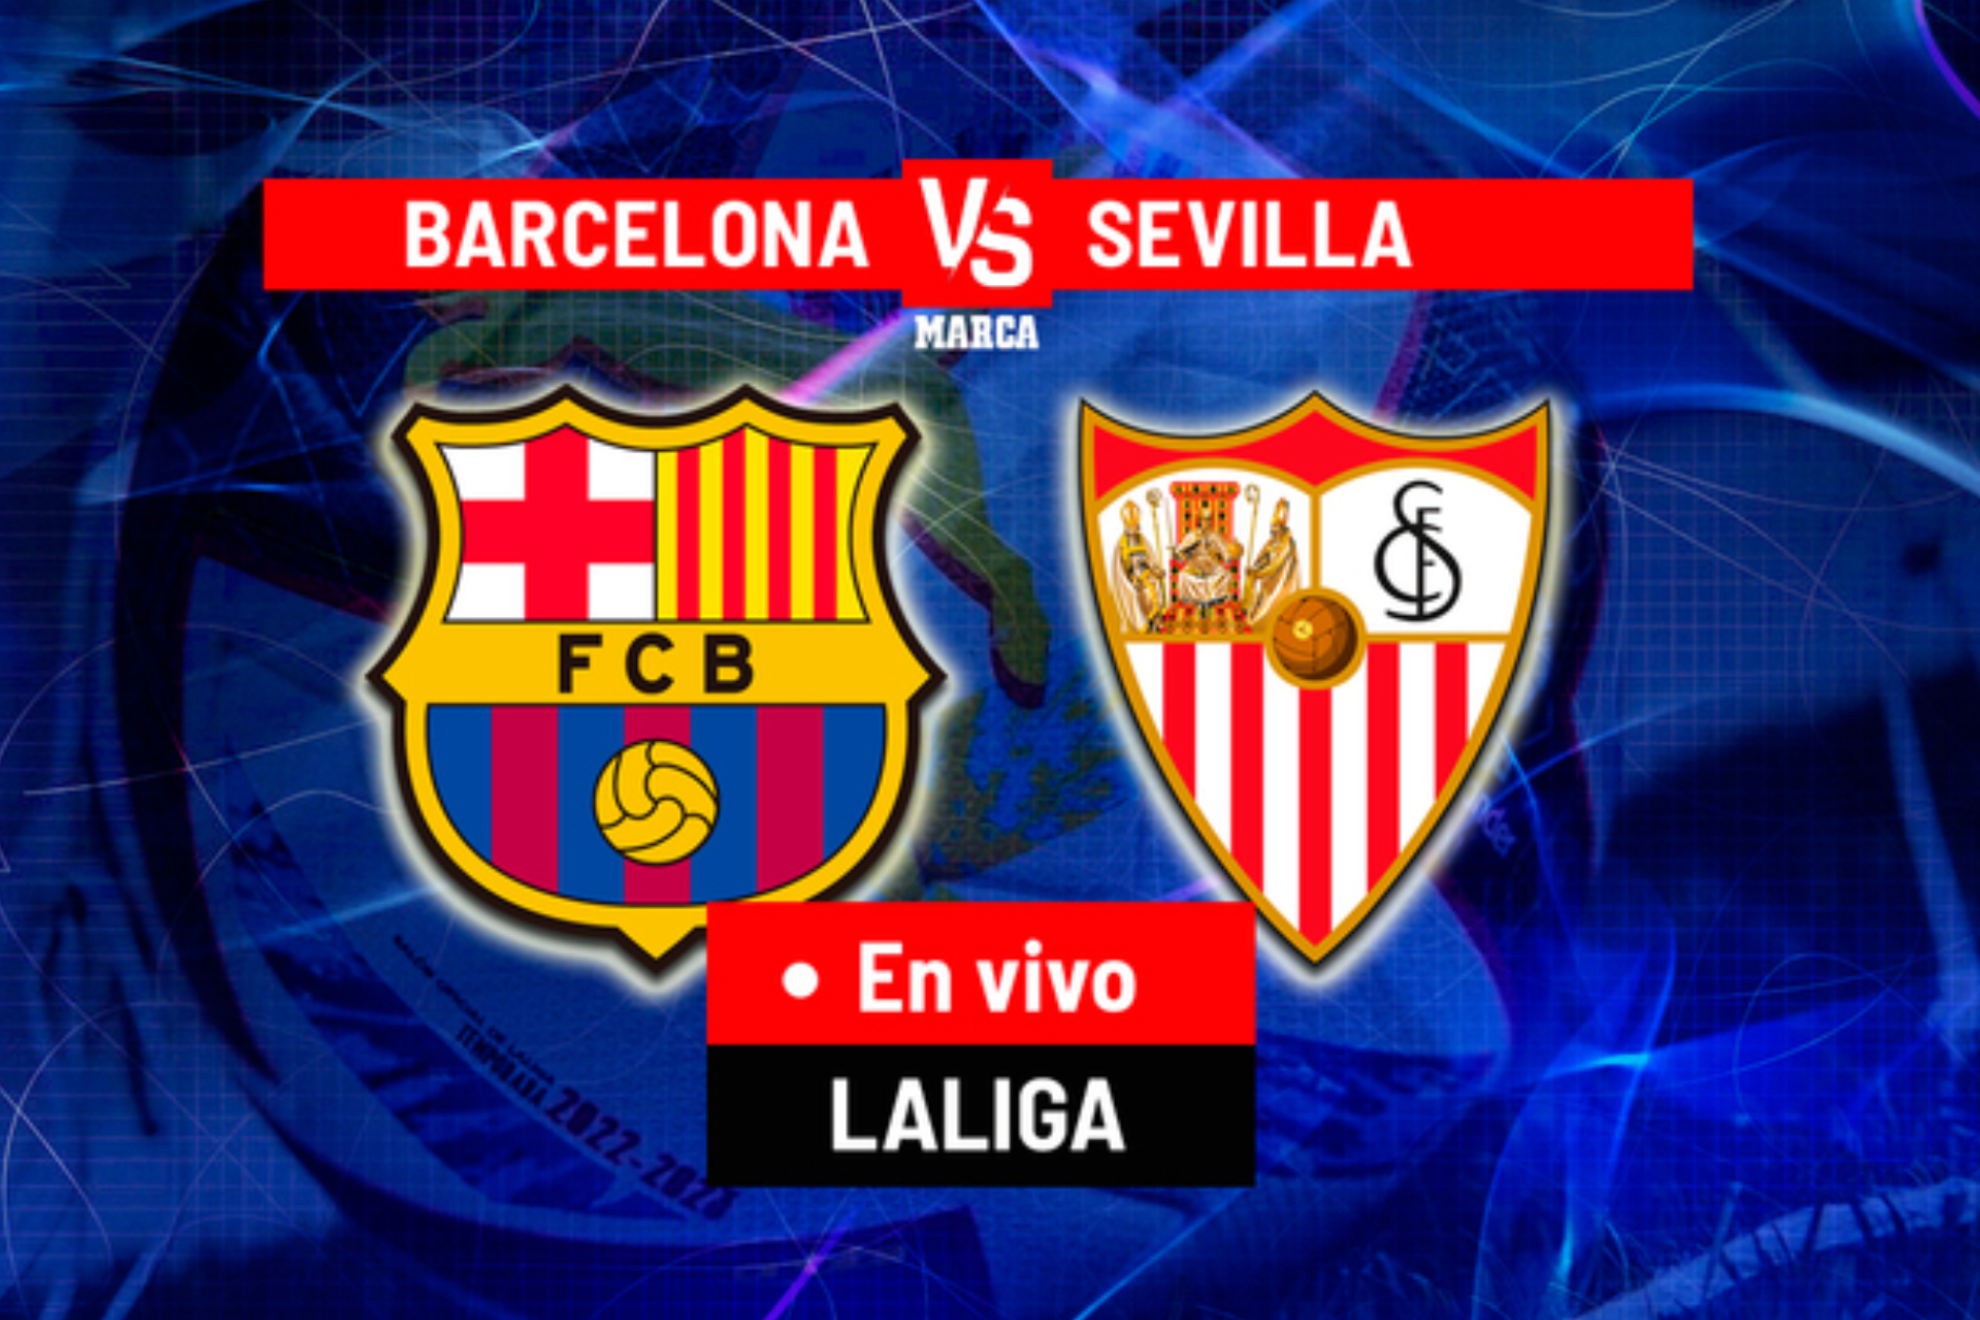 Sevilla Live: Barcelona return to the lead with a 1-0 win